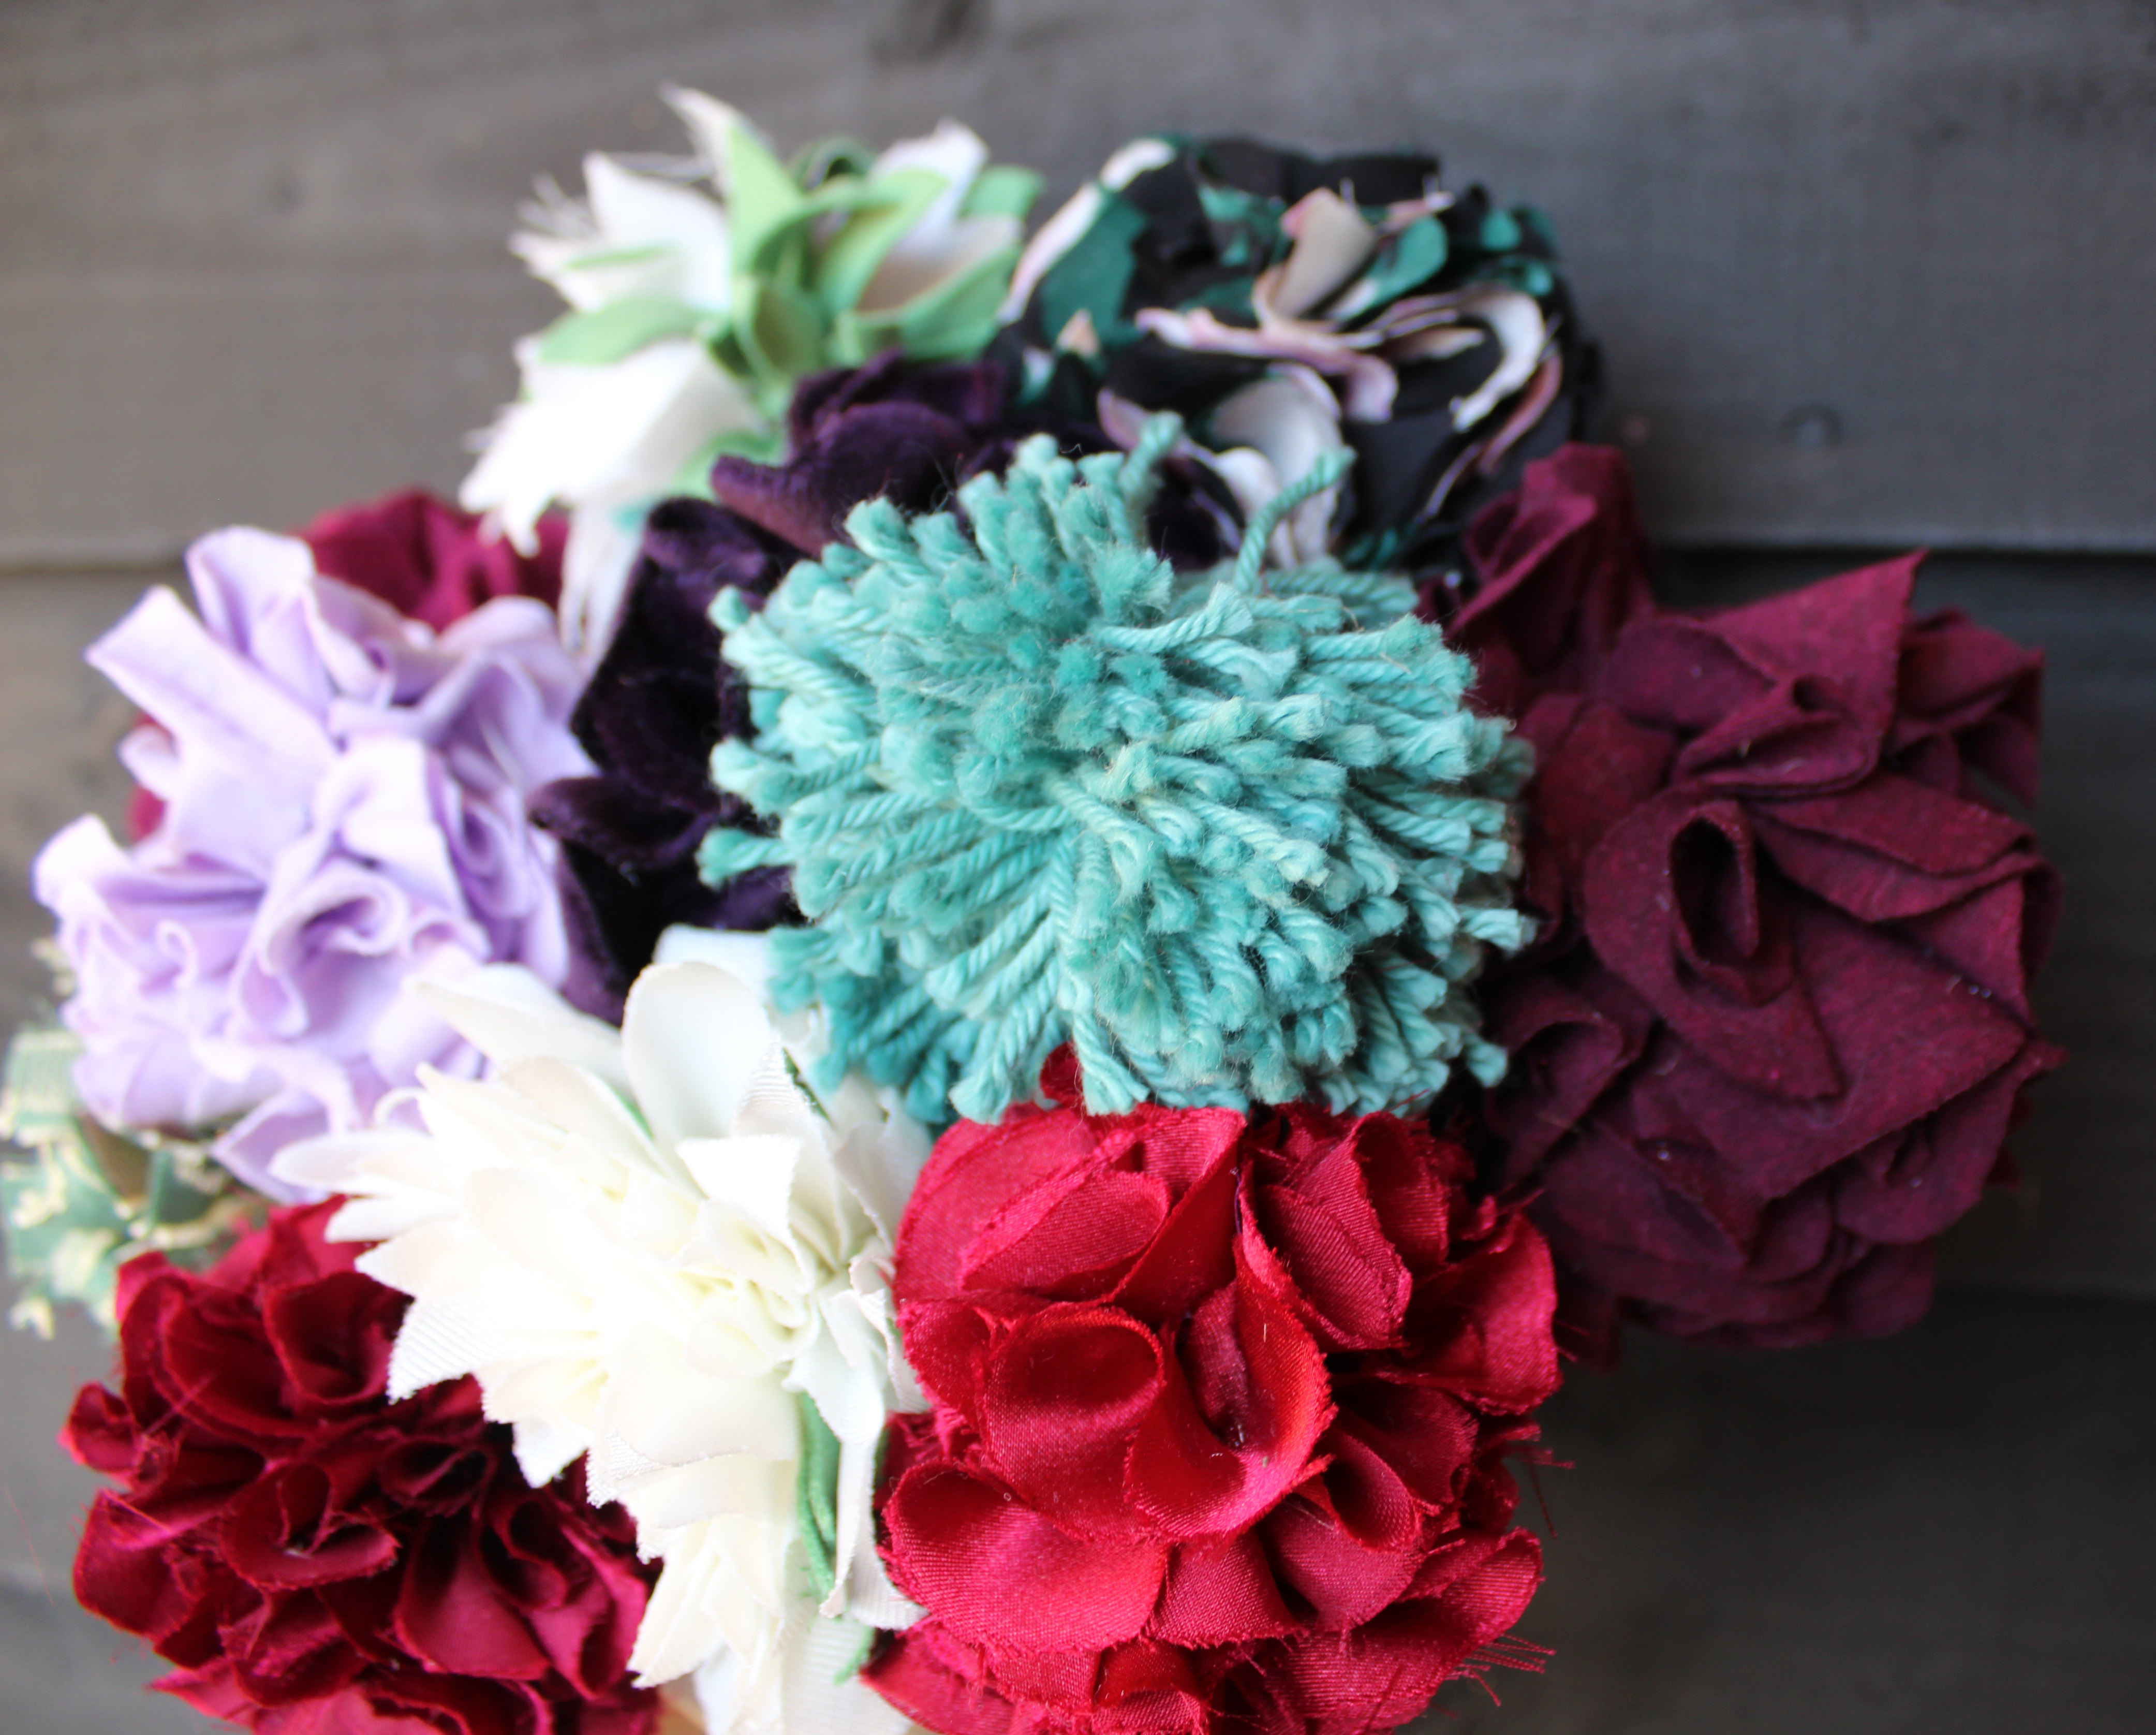 Rag rug bouquet of fabric flowers made using textile waste and wool